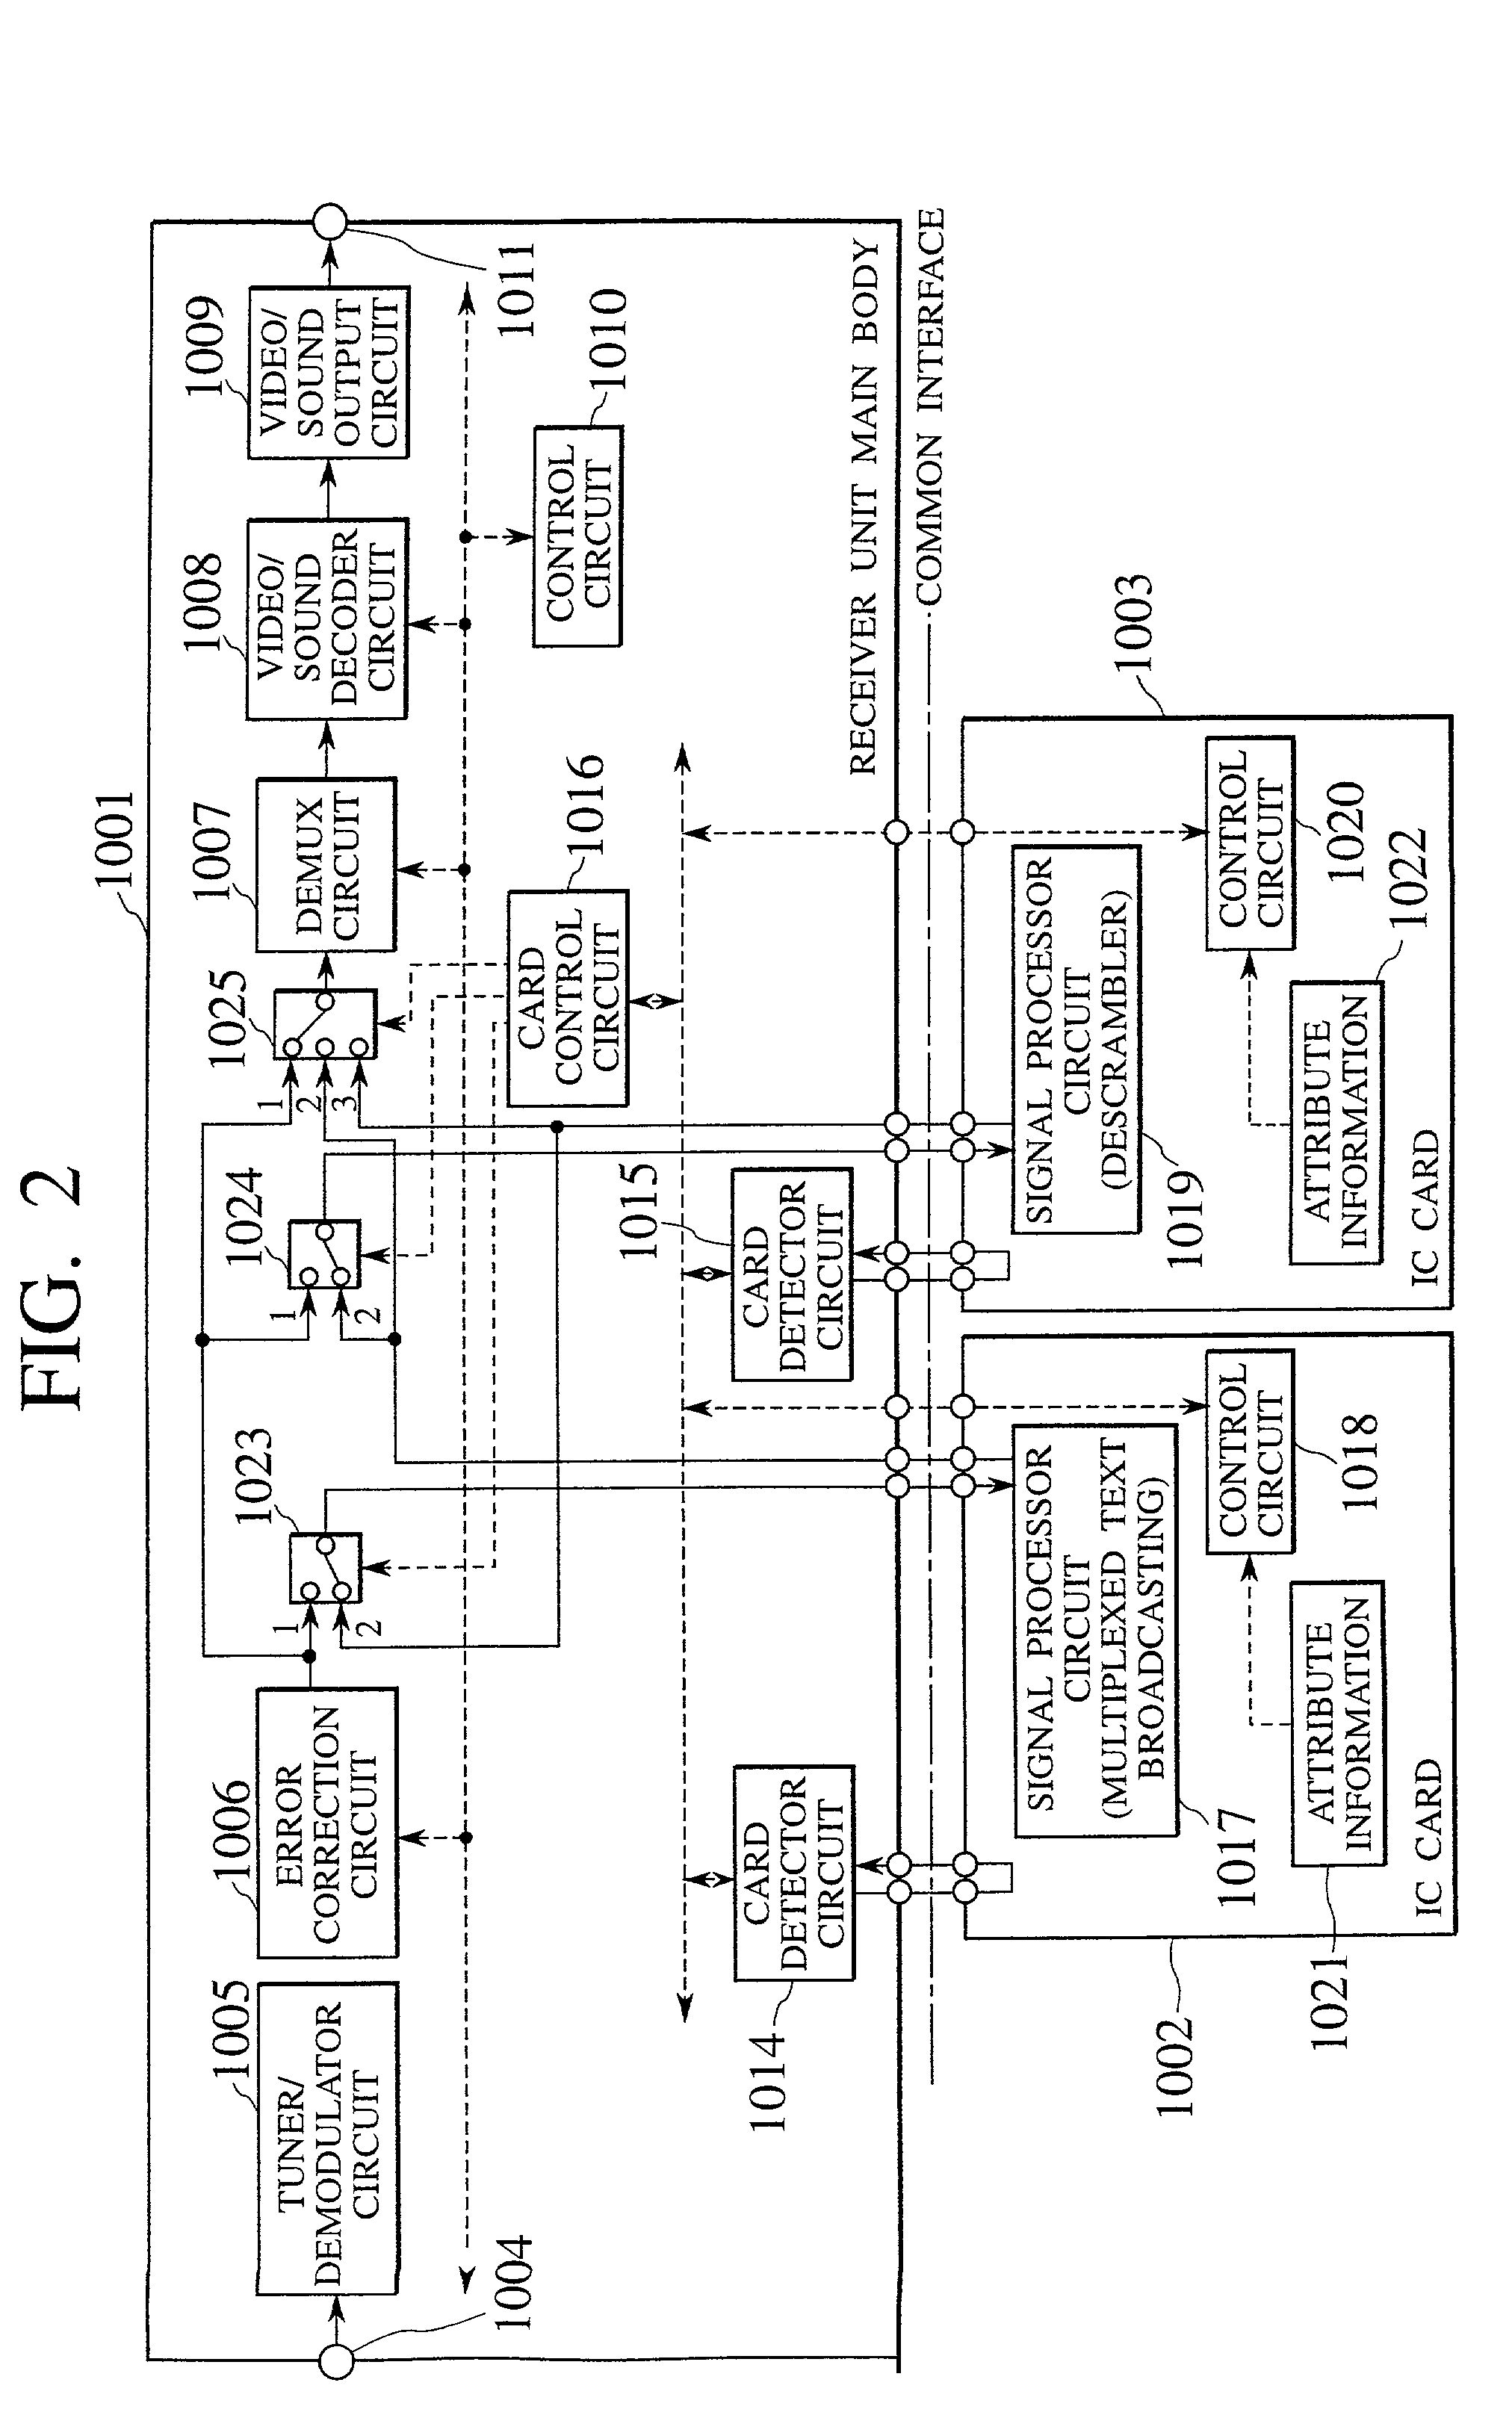 Signal processor unit and digital information receiver with detachable card module